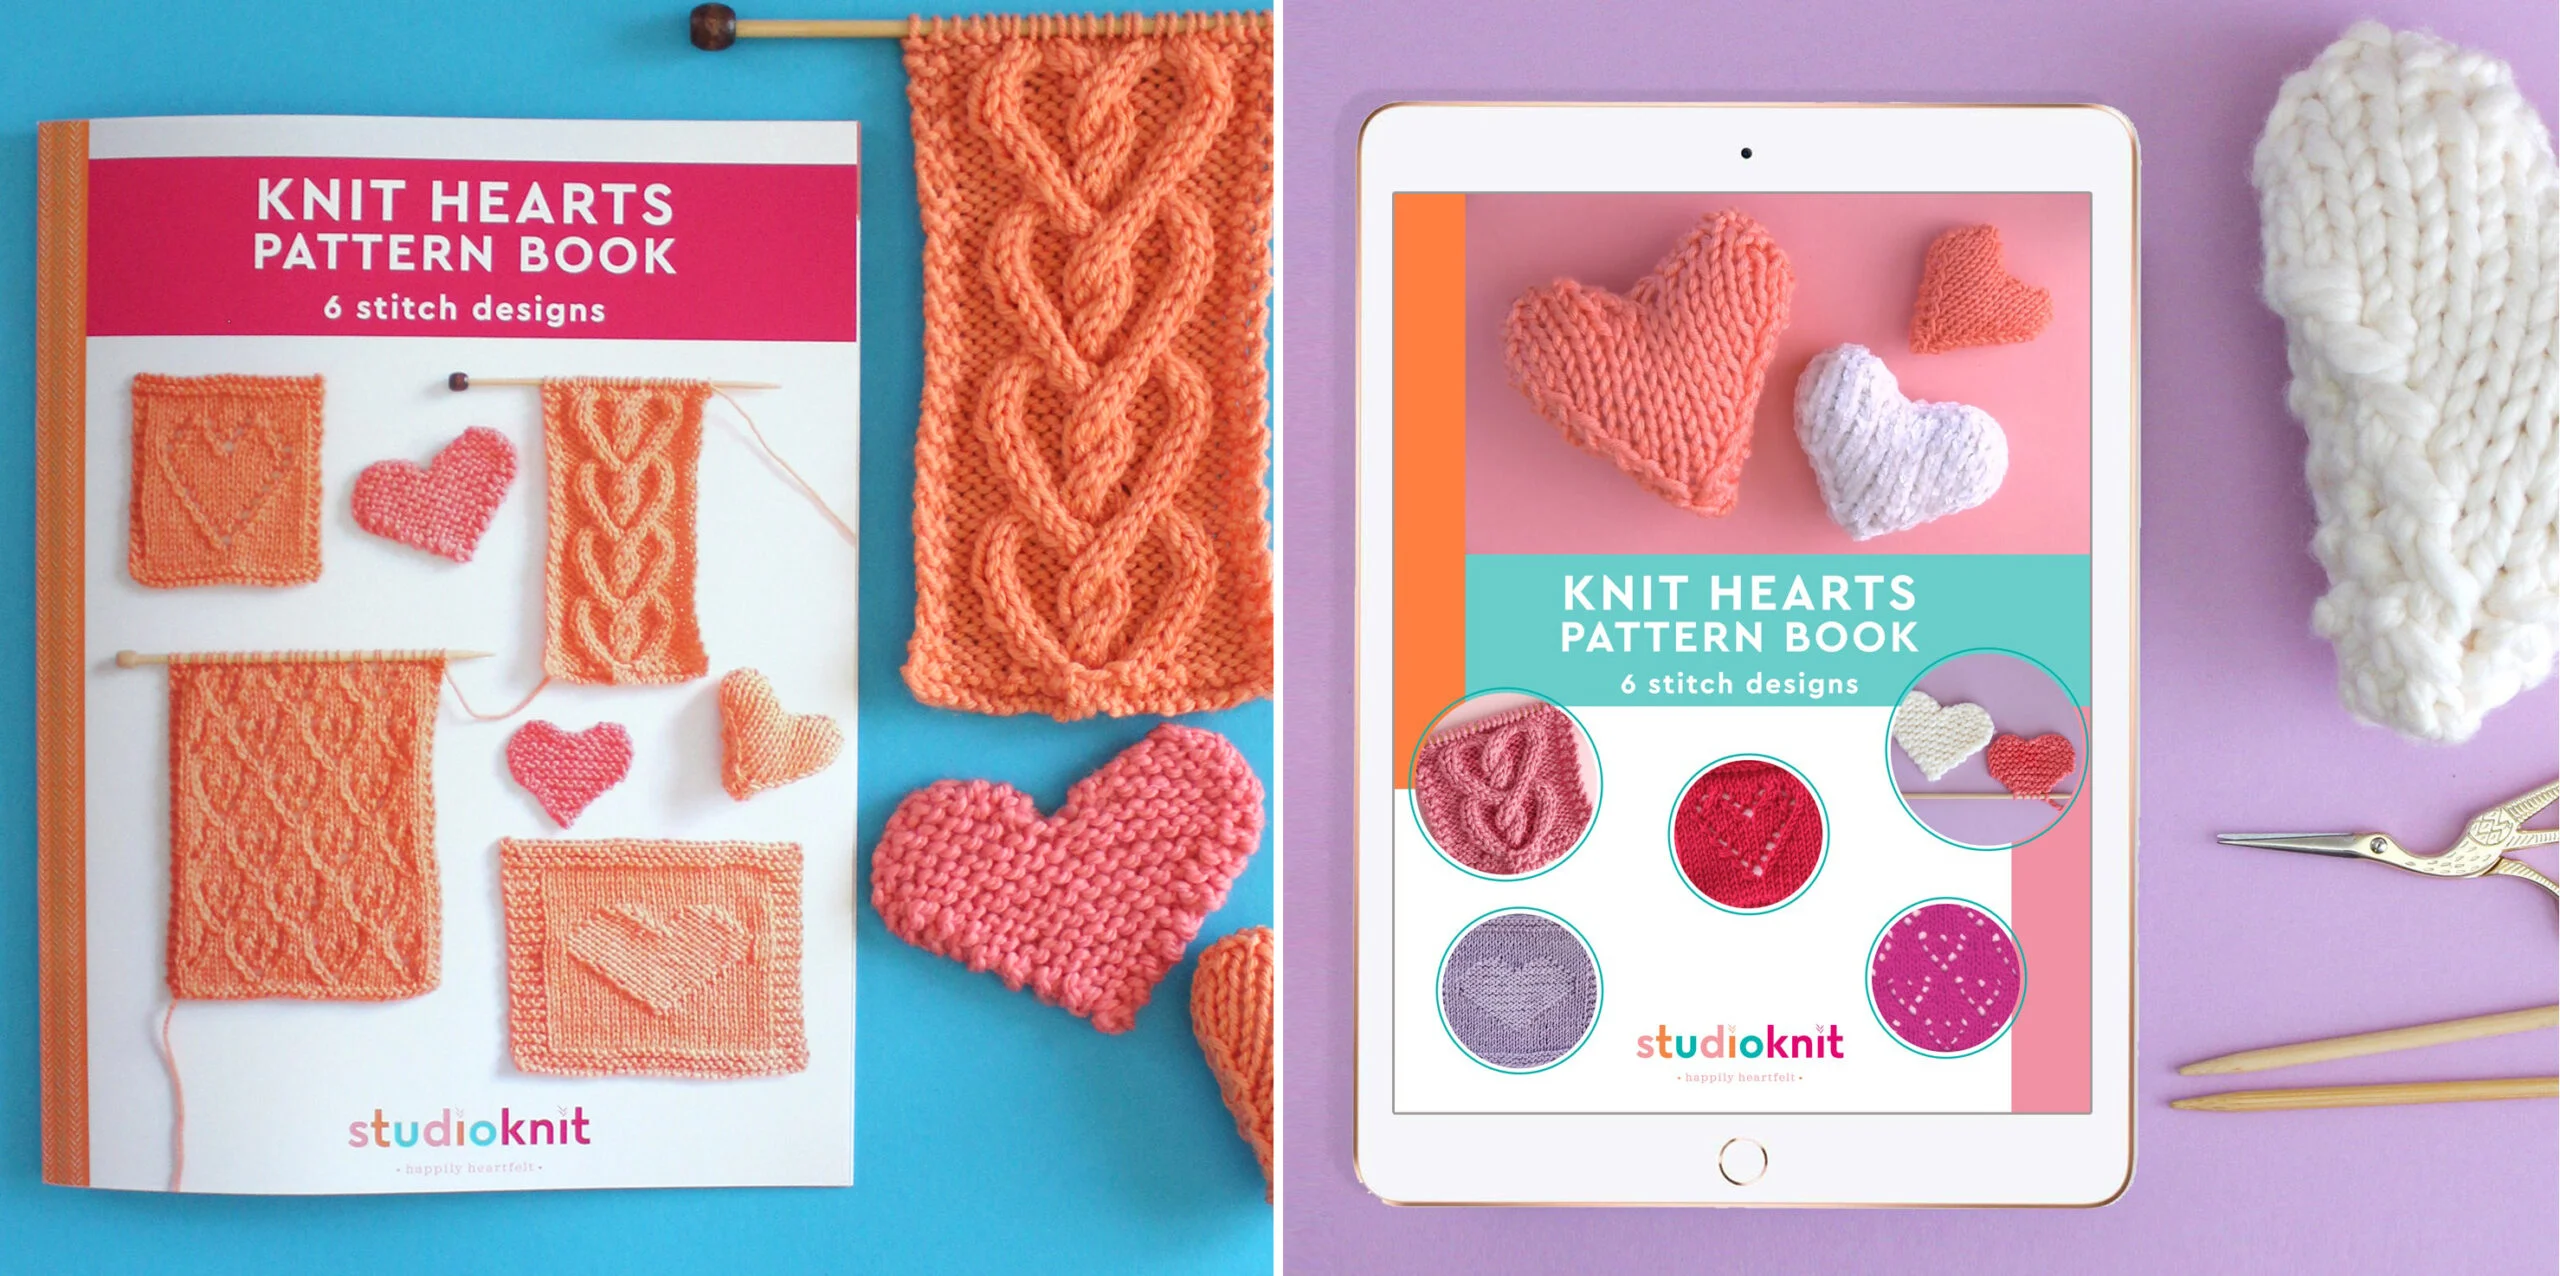 Knit Hearts Pattern Books - Printed and Digital Versions by Studio Knit